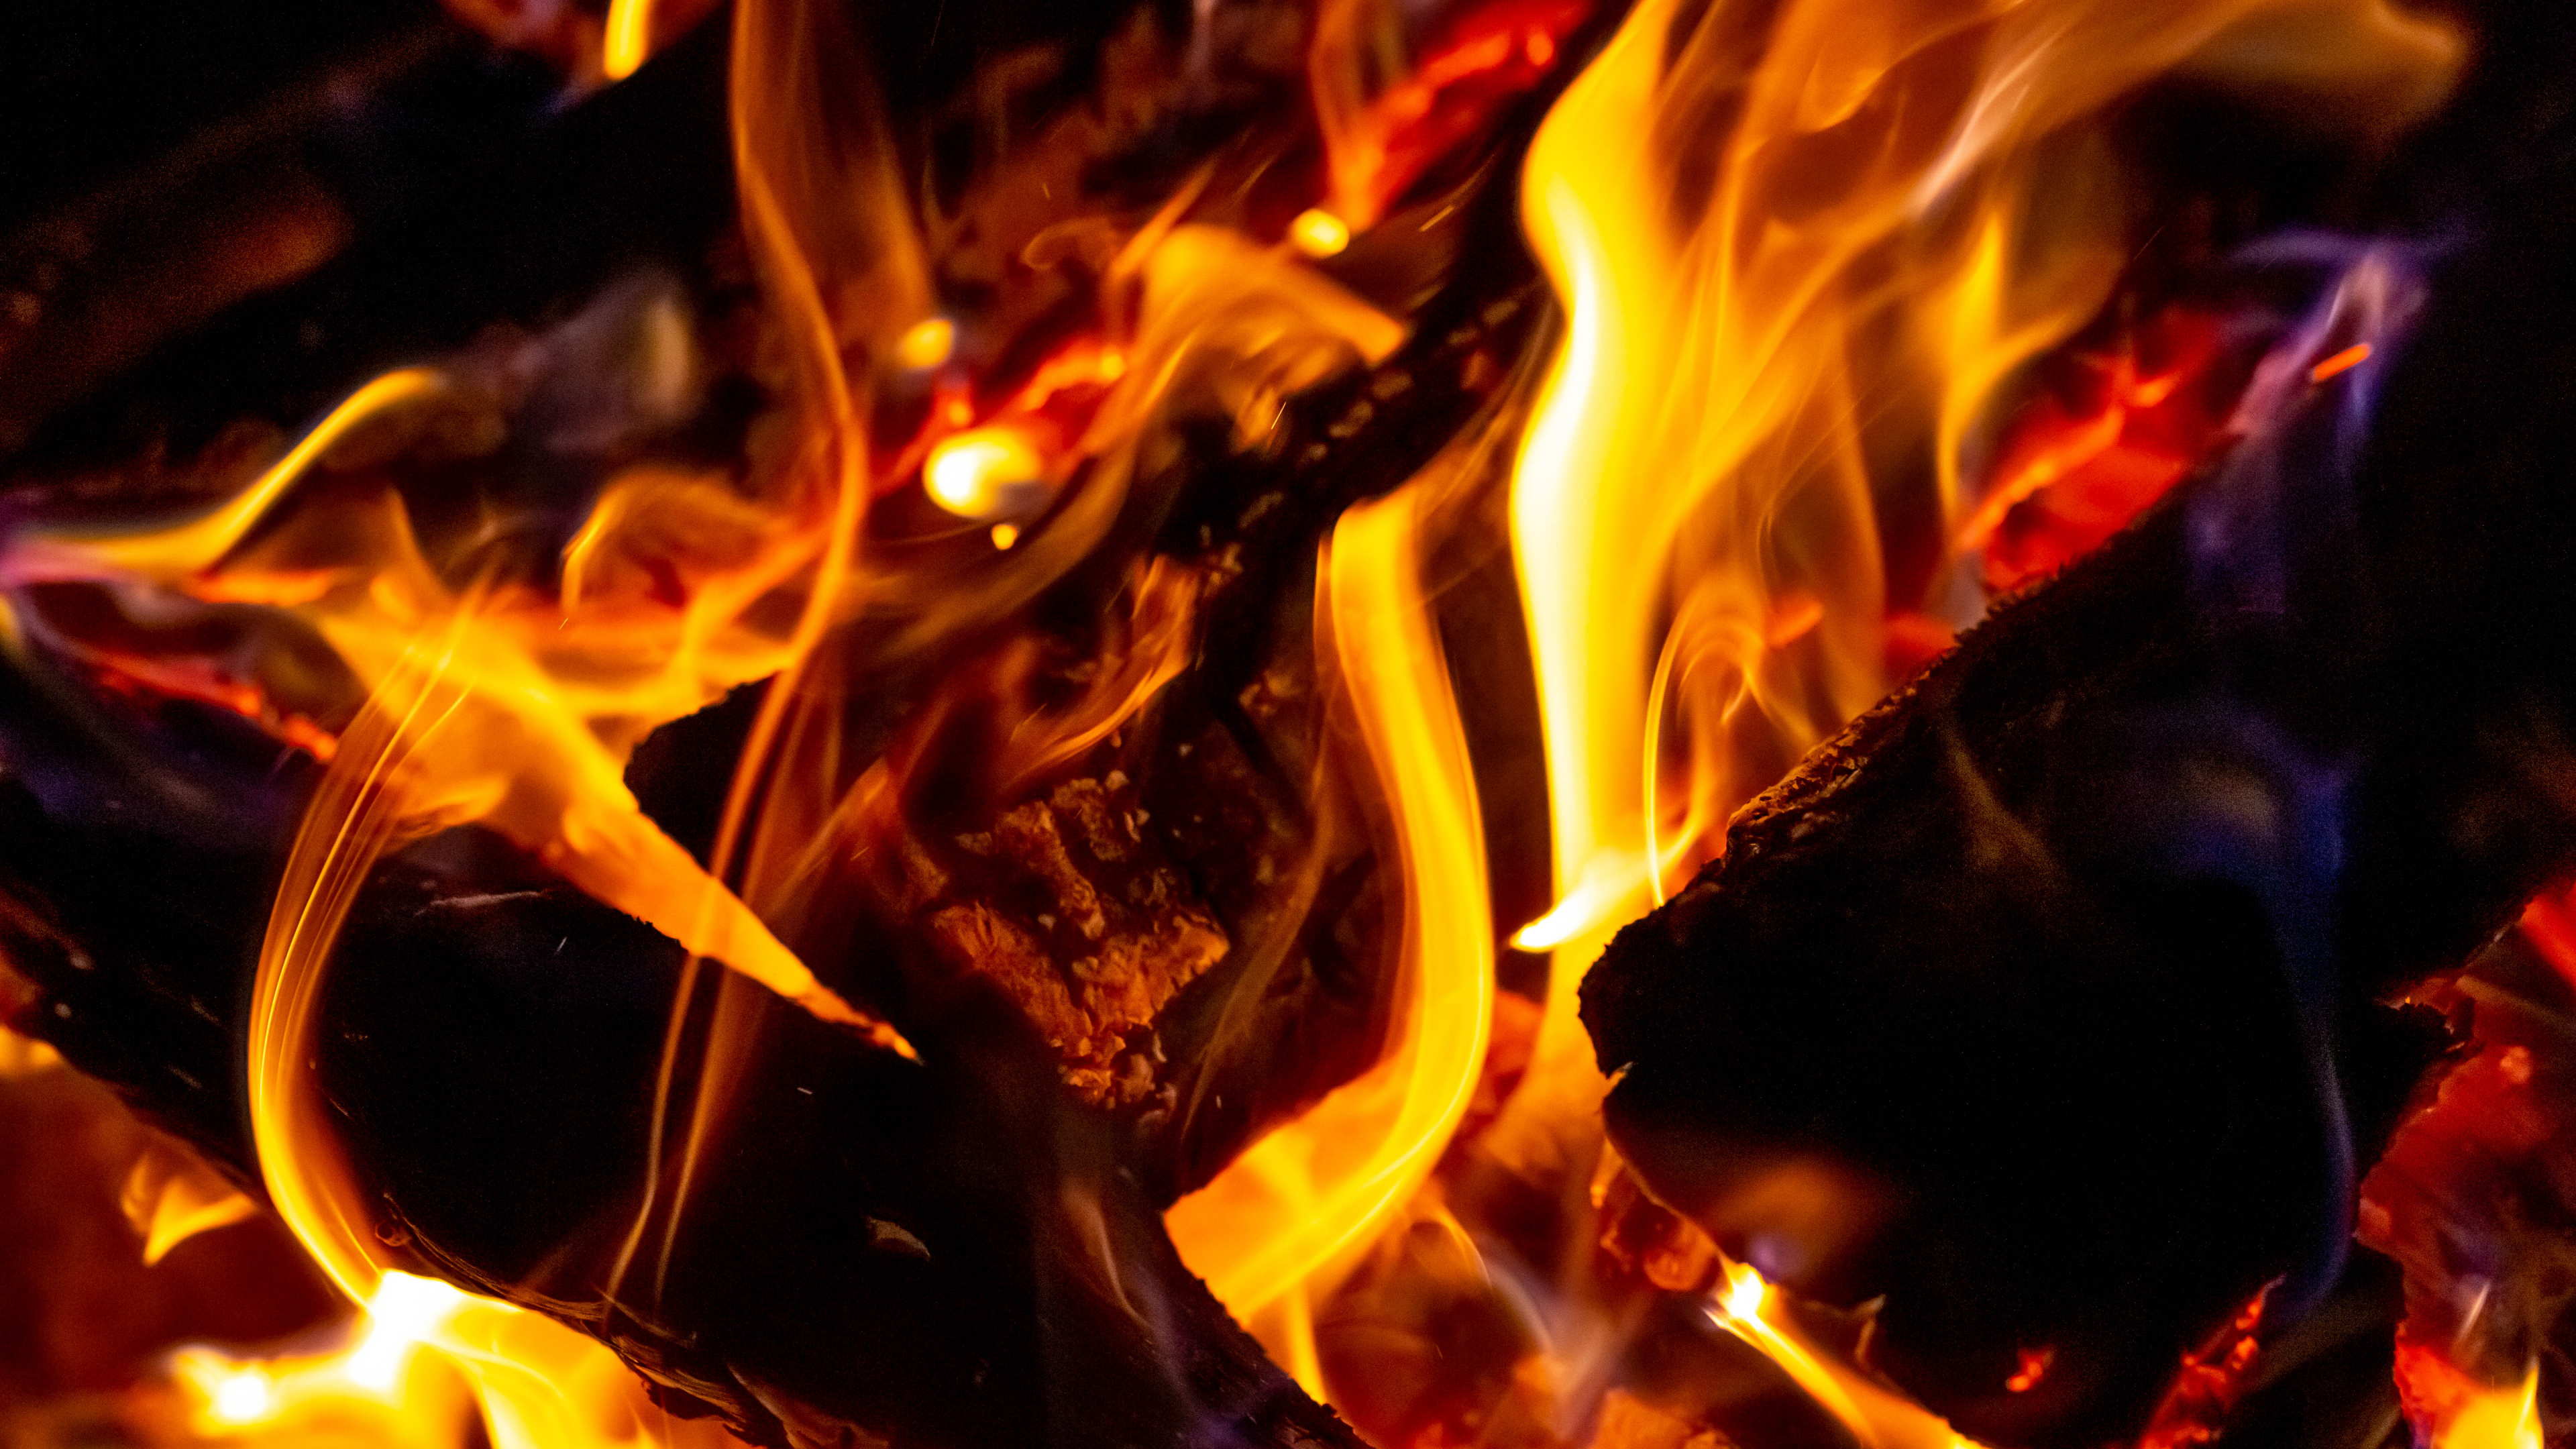 Orange and Black Fire in Close up Photography. Wallpaper in 3840x2160 Resolution